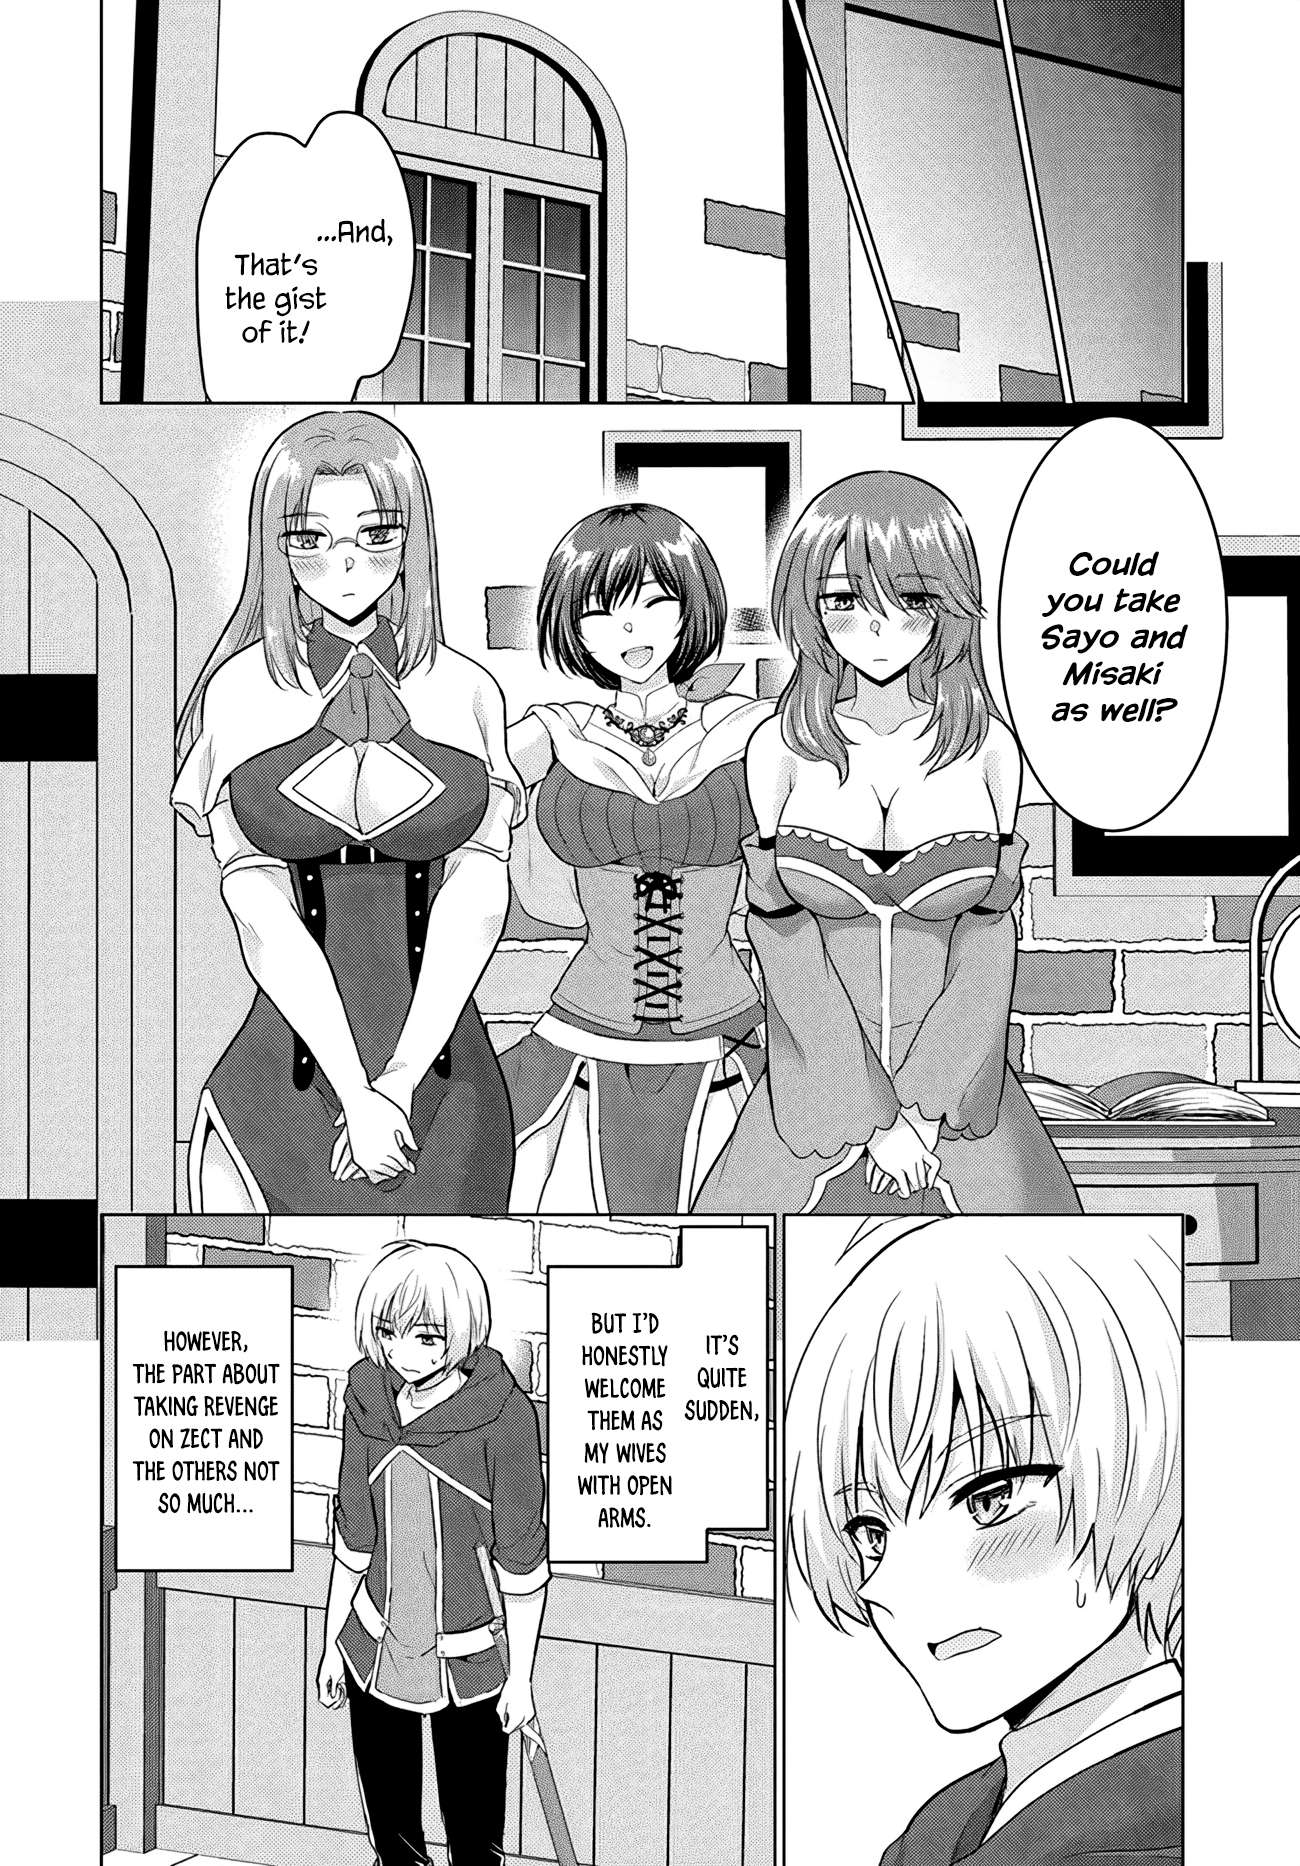 Read The Hero Took Everything From Me, So I Partied With The Hero'S Mother!  Chapter 10 on Mangakakalot